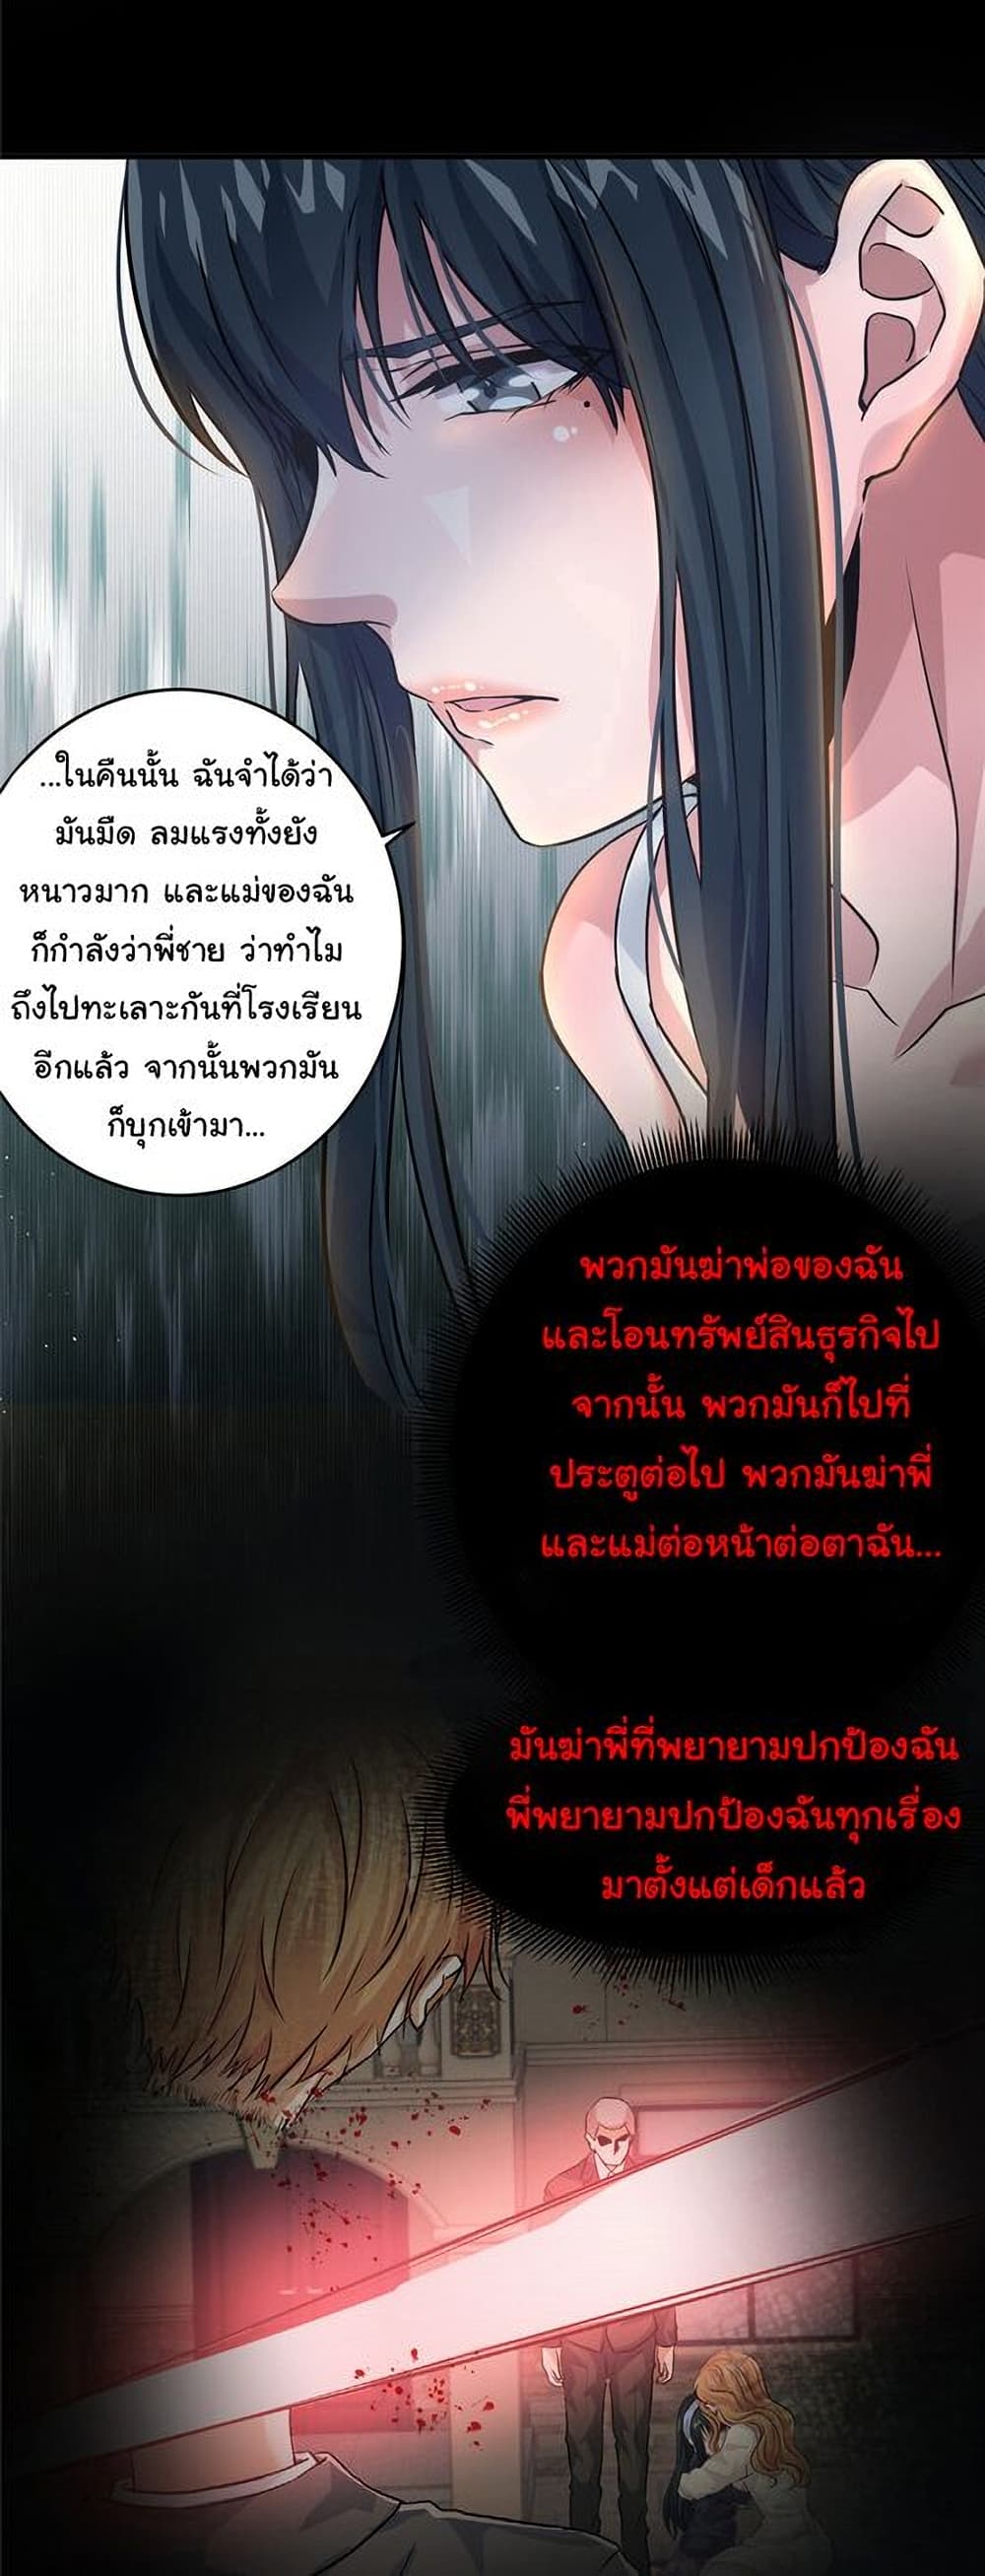 Live Steadily, Donโ€t Wave เธ•เธญเธเธ—เธตเน 8 (44)